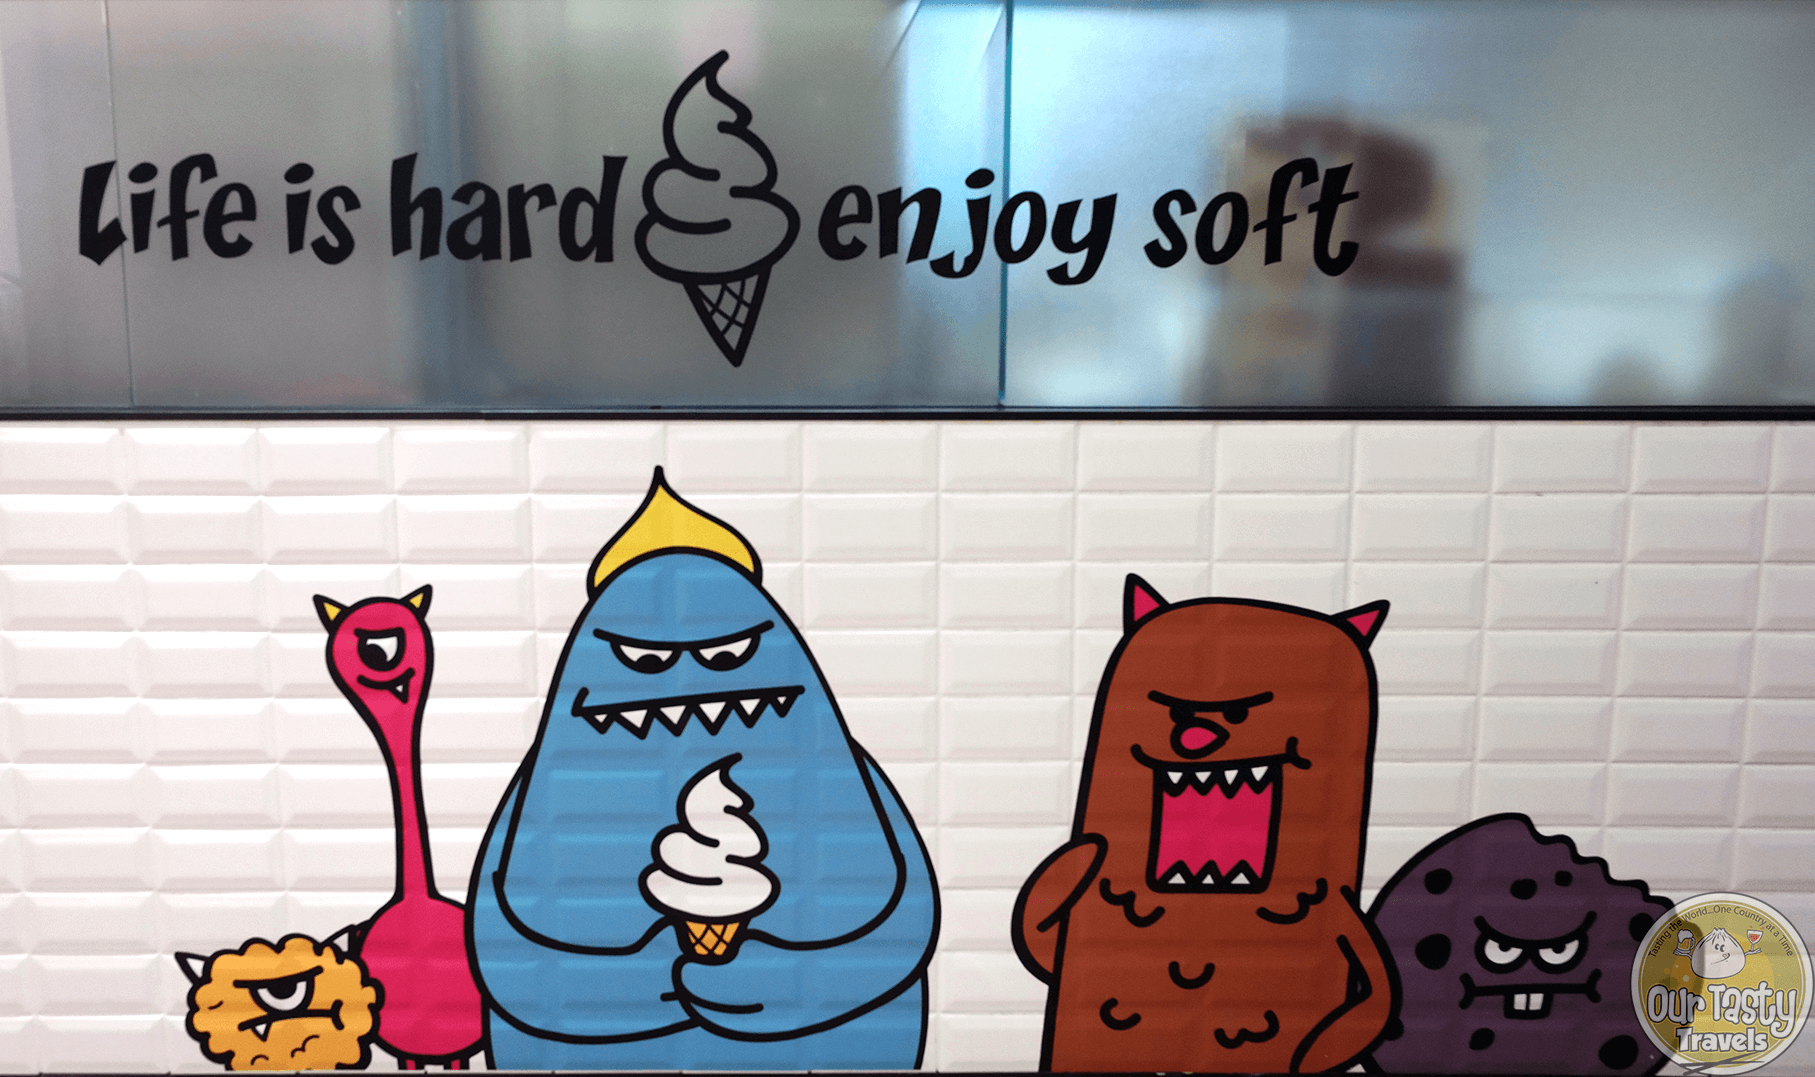 Sweet Monster Mascots and tagline "Life is hard, enjoy soft." -- ourtastytravels.com